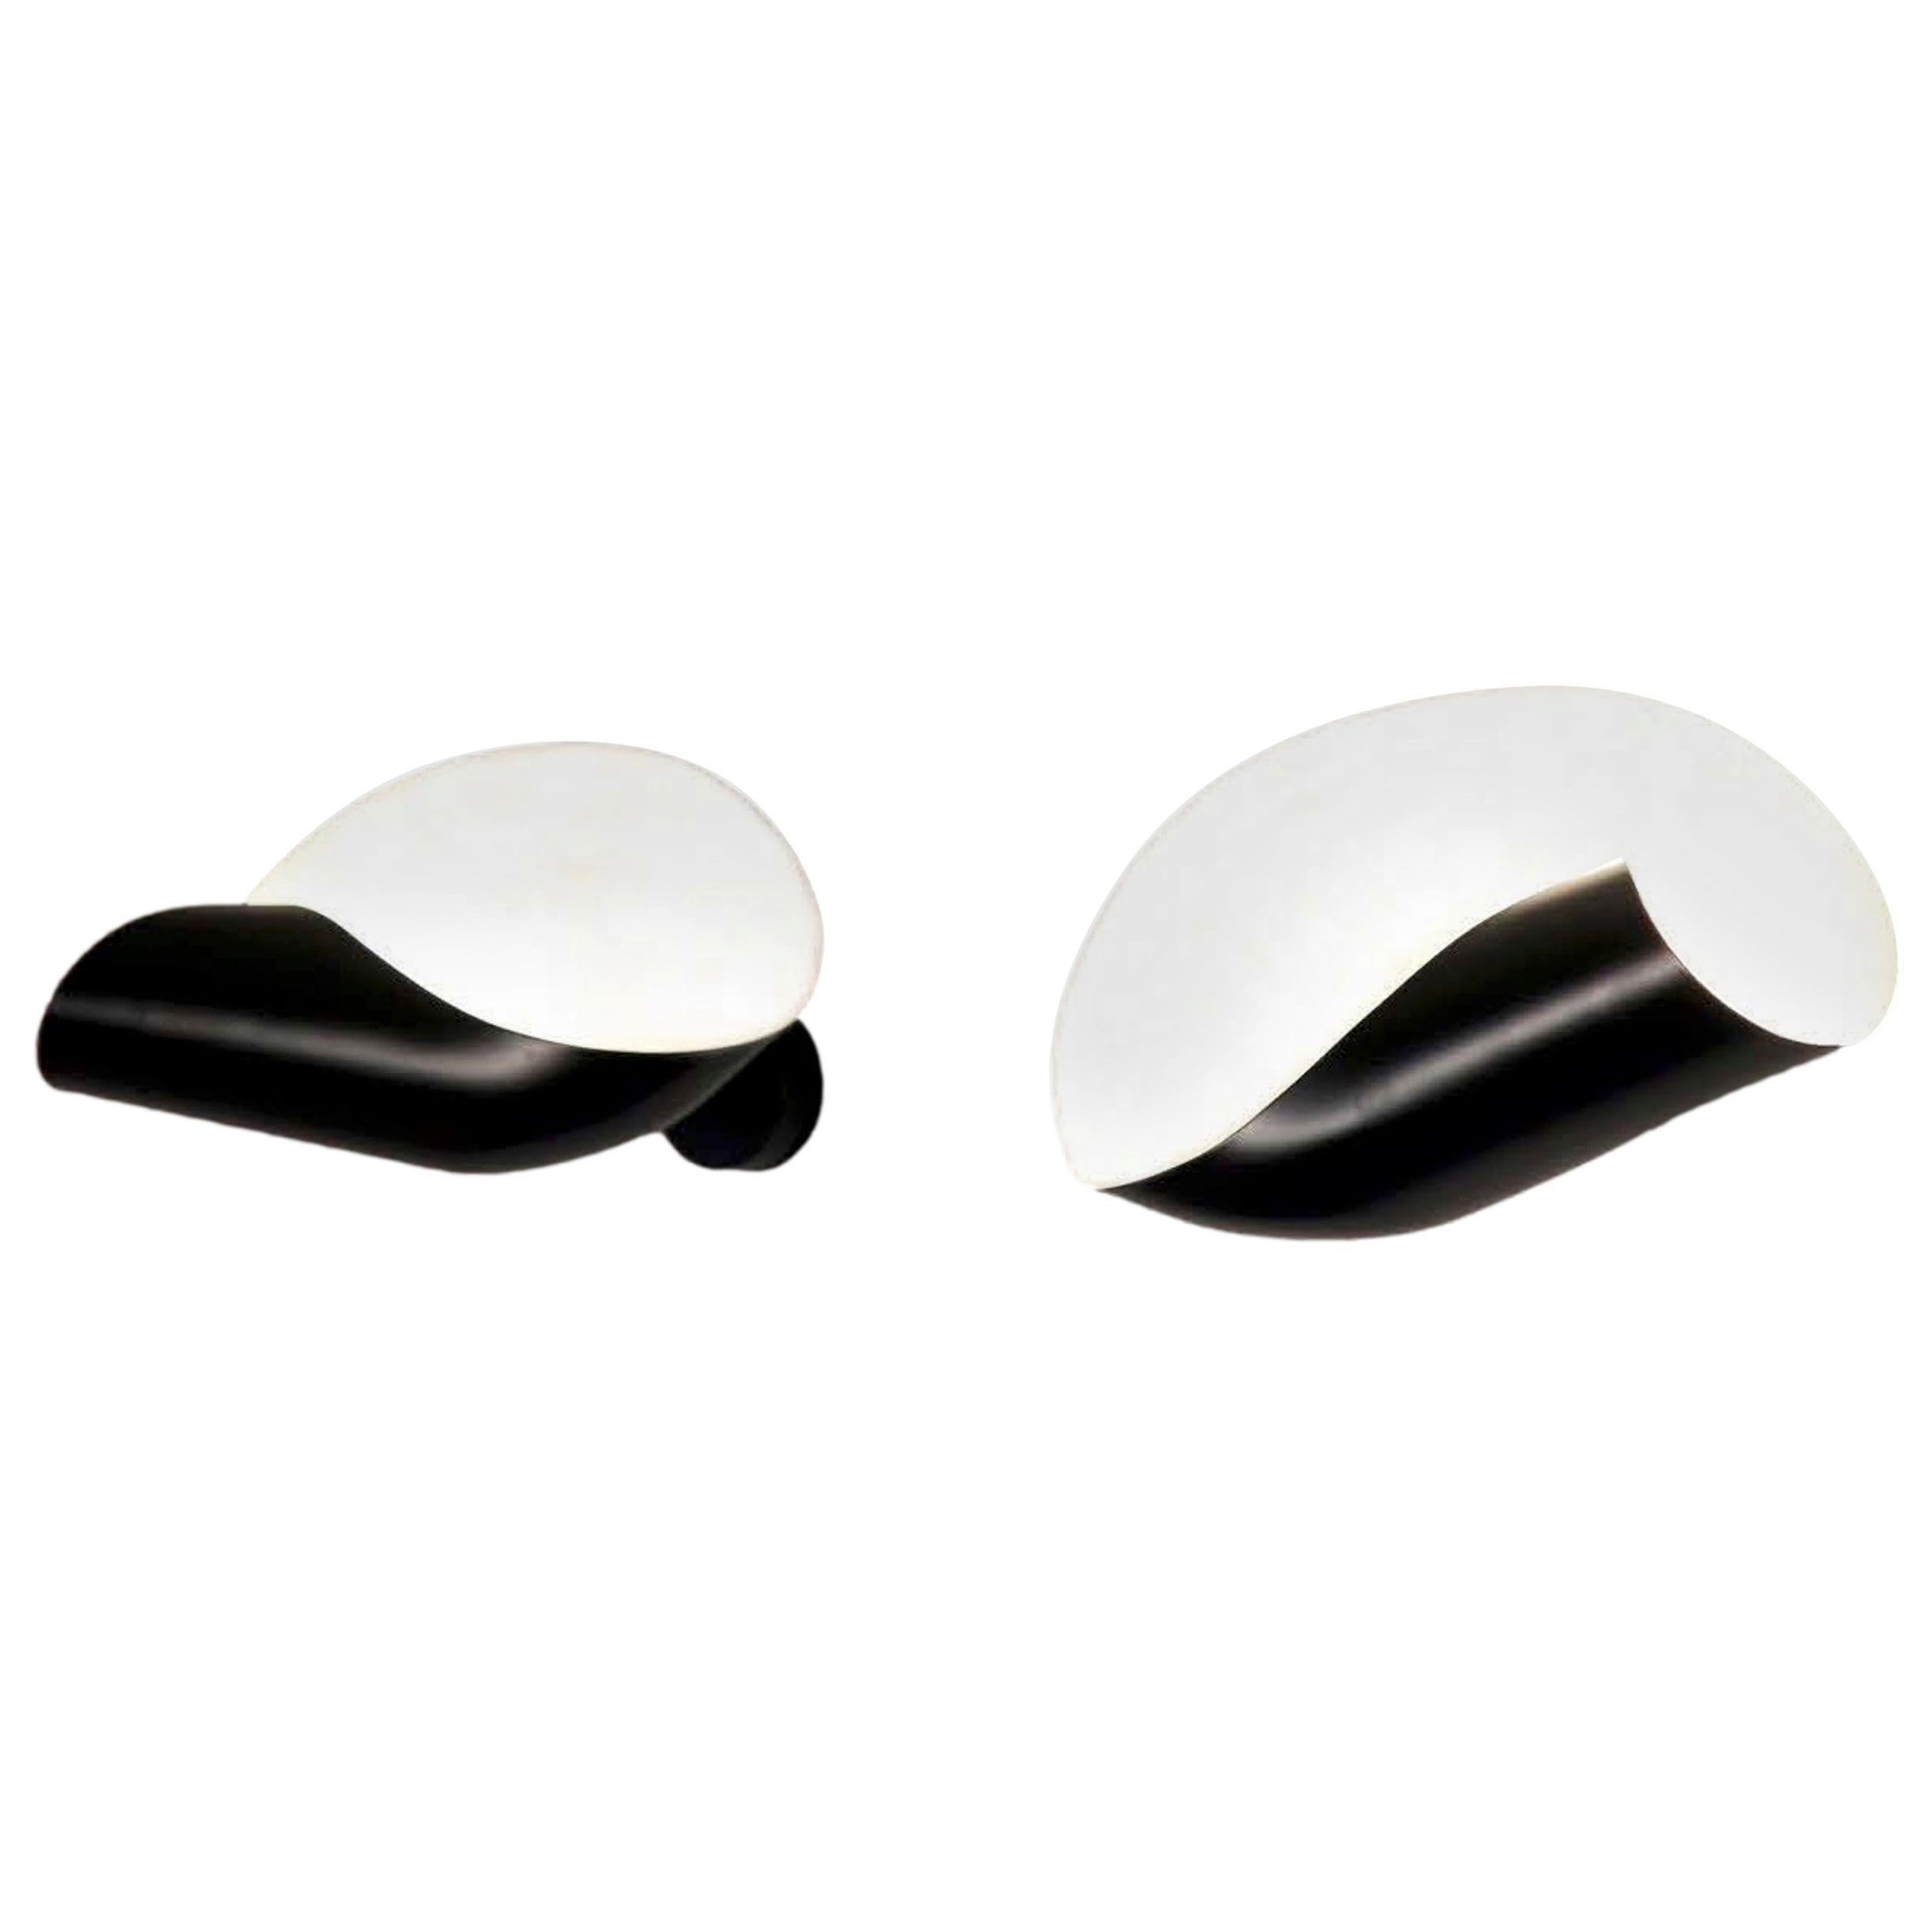 Serge Mouille - Conche Sconce in Black or White For Sale